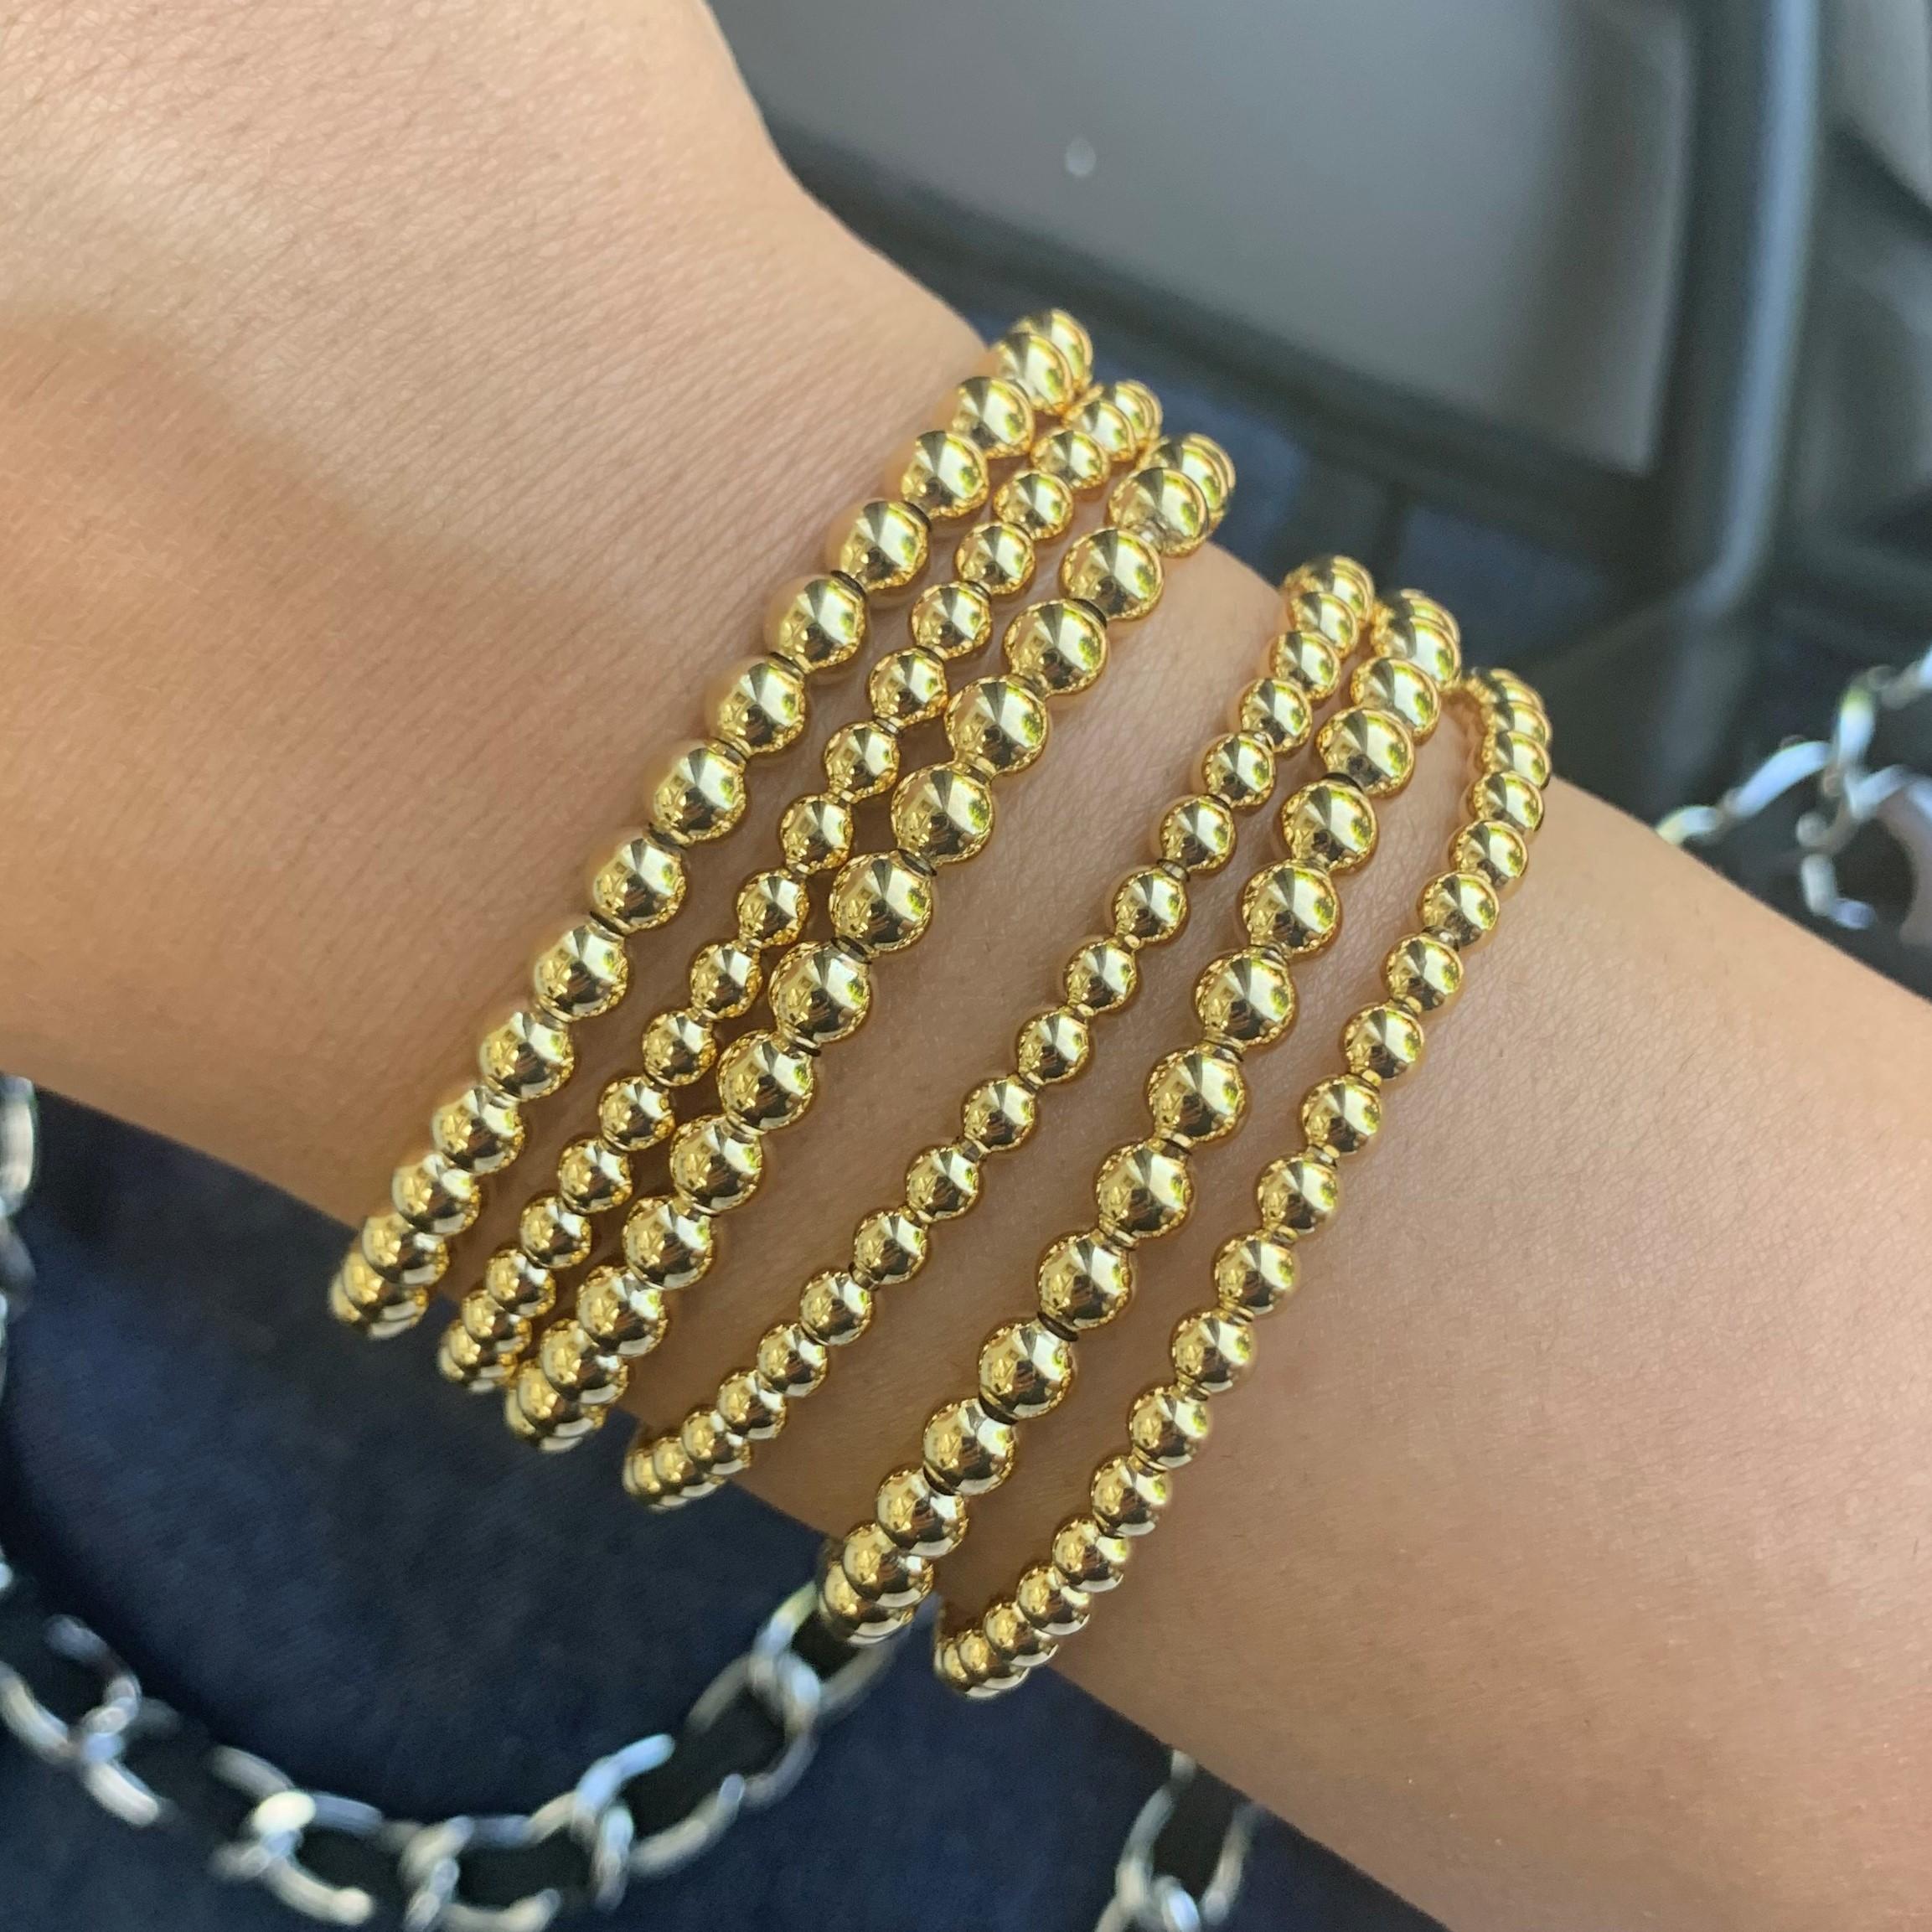 Stackable Design: This elegant piece of jewelry will fit perfectly with your favorite outfits; wear it alone or combine it with other bracelets, this bracelet will be the foundational cornerstone of your collection. 
Timeless and unique bracelet: